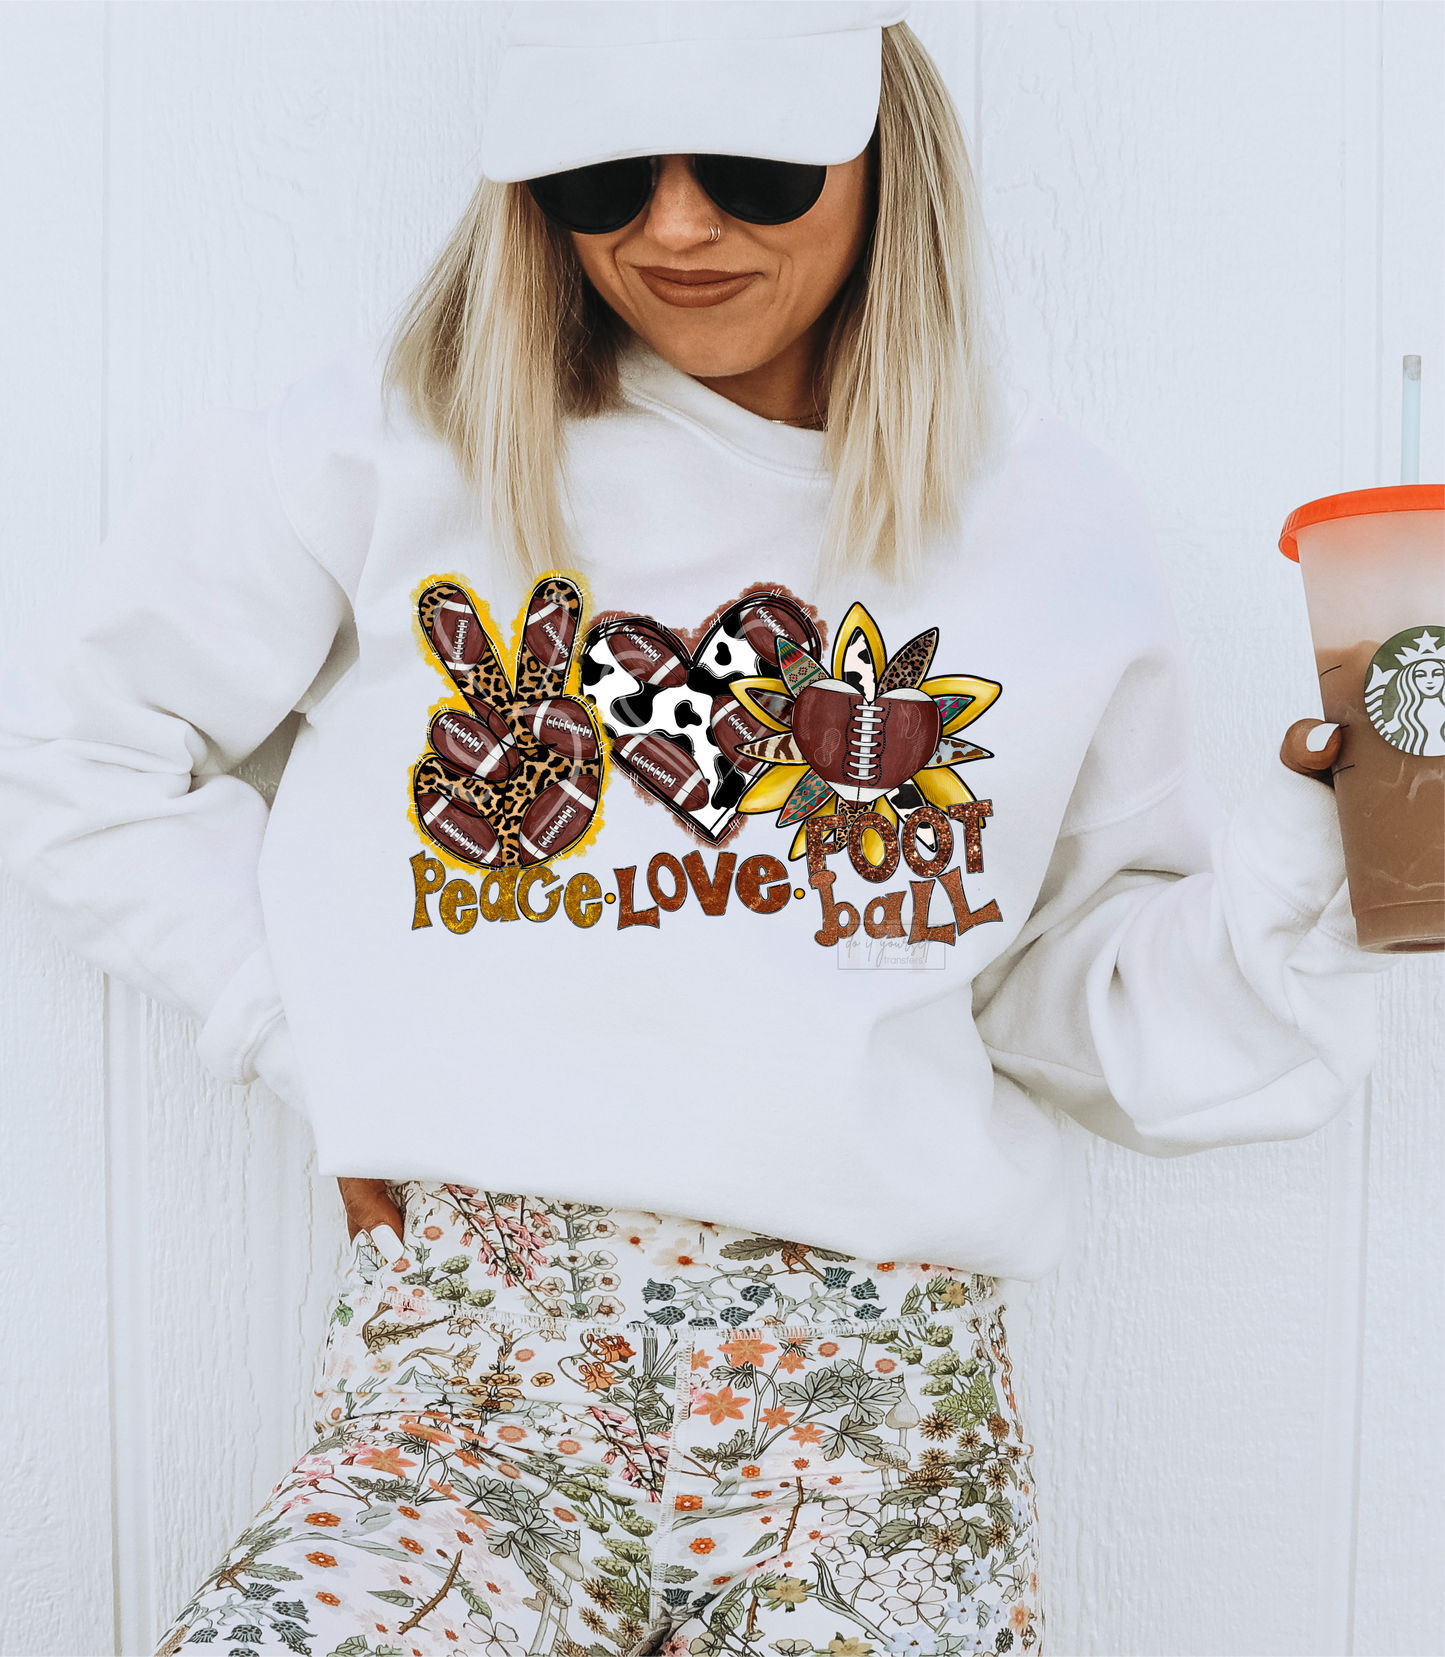 Peace Love Football leopard heart  size ADULT 7. DTF TRANSFERPRINT TO ORDER